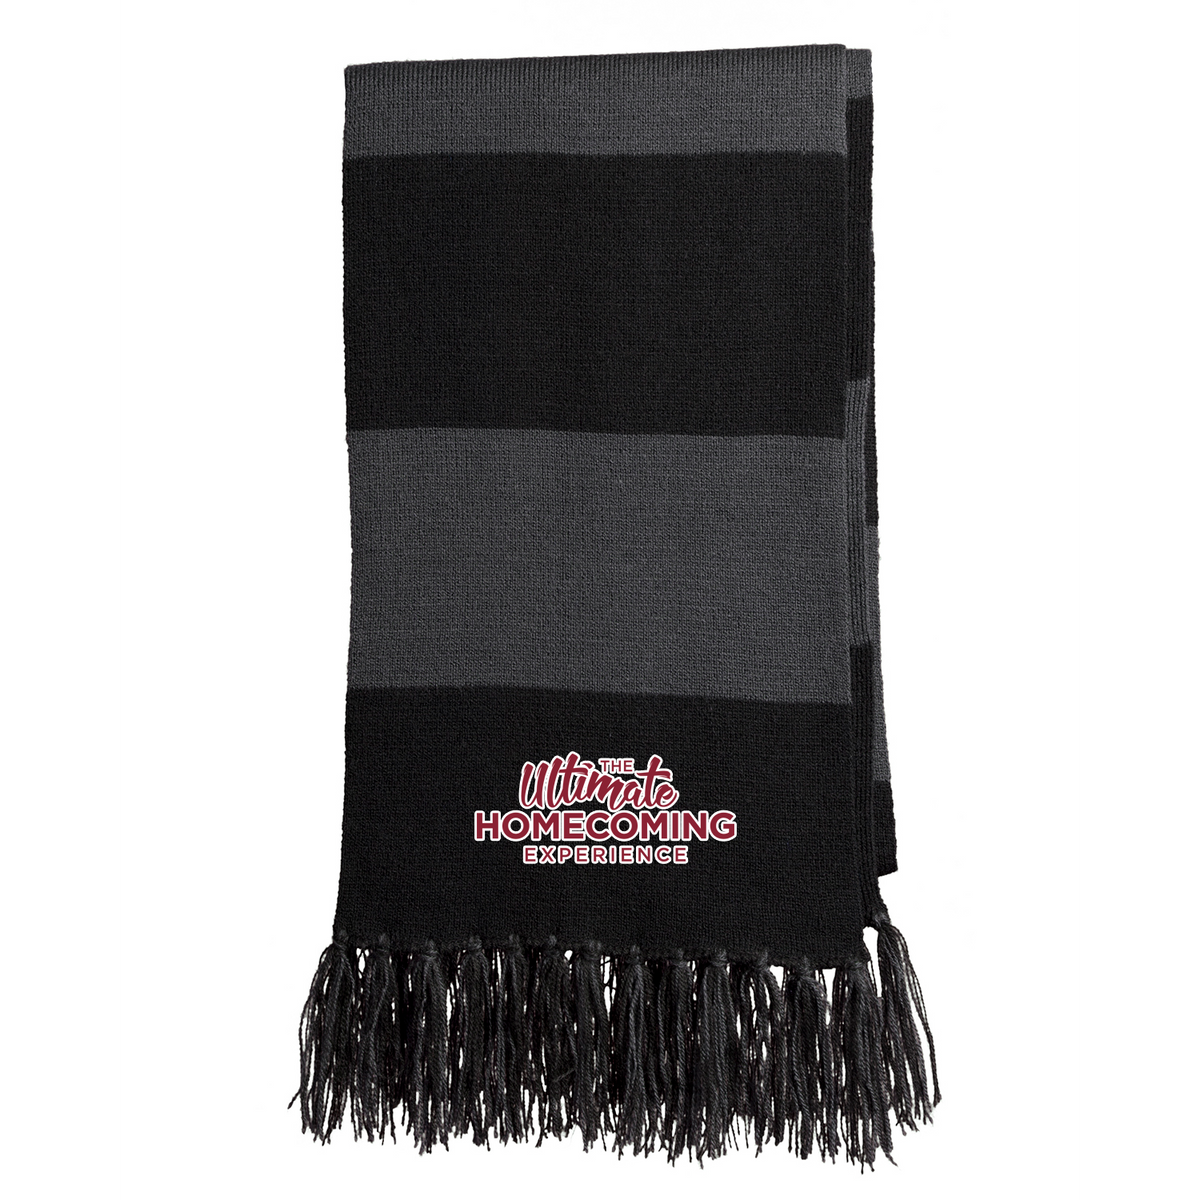 NC Central University Homecoming Team Scarf